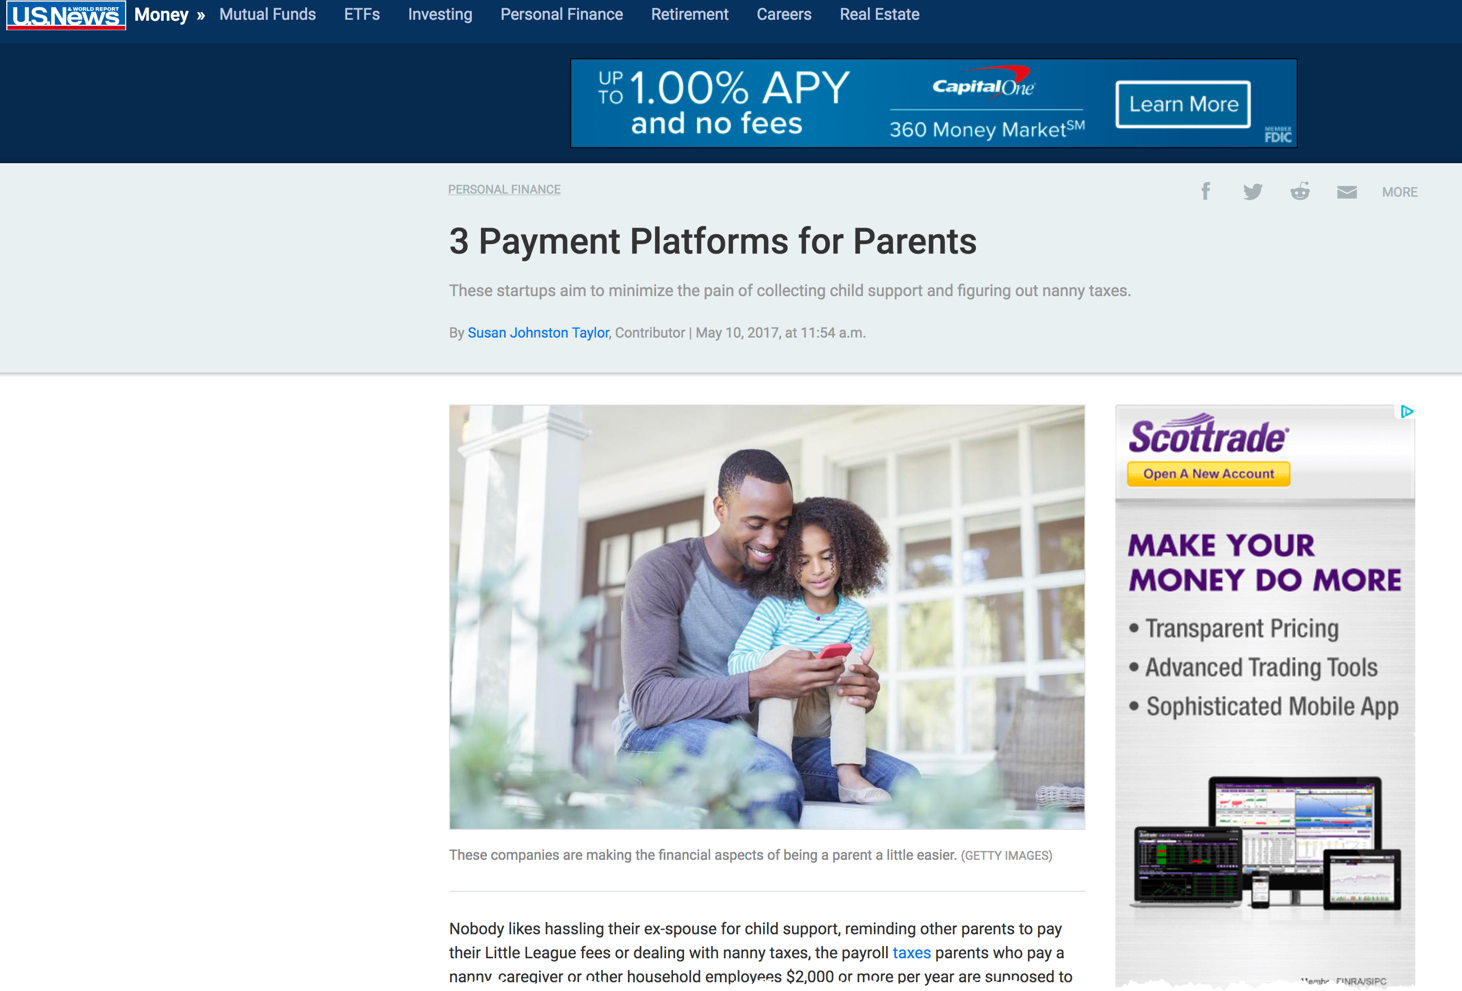 NannyPay in US News & World Report